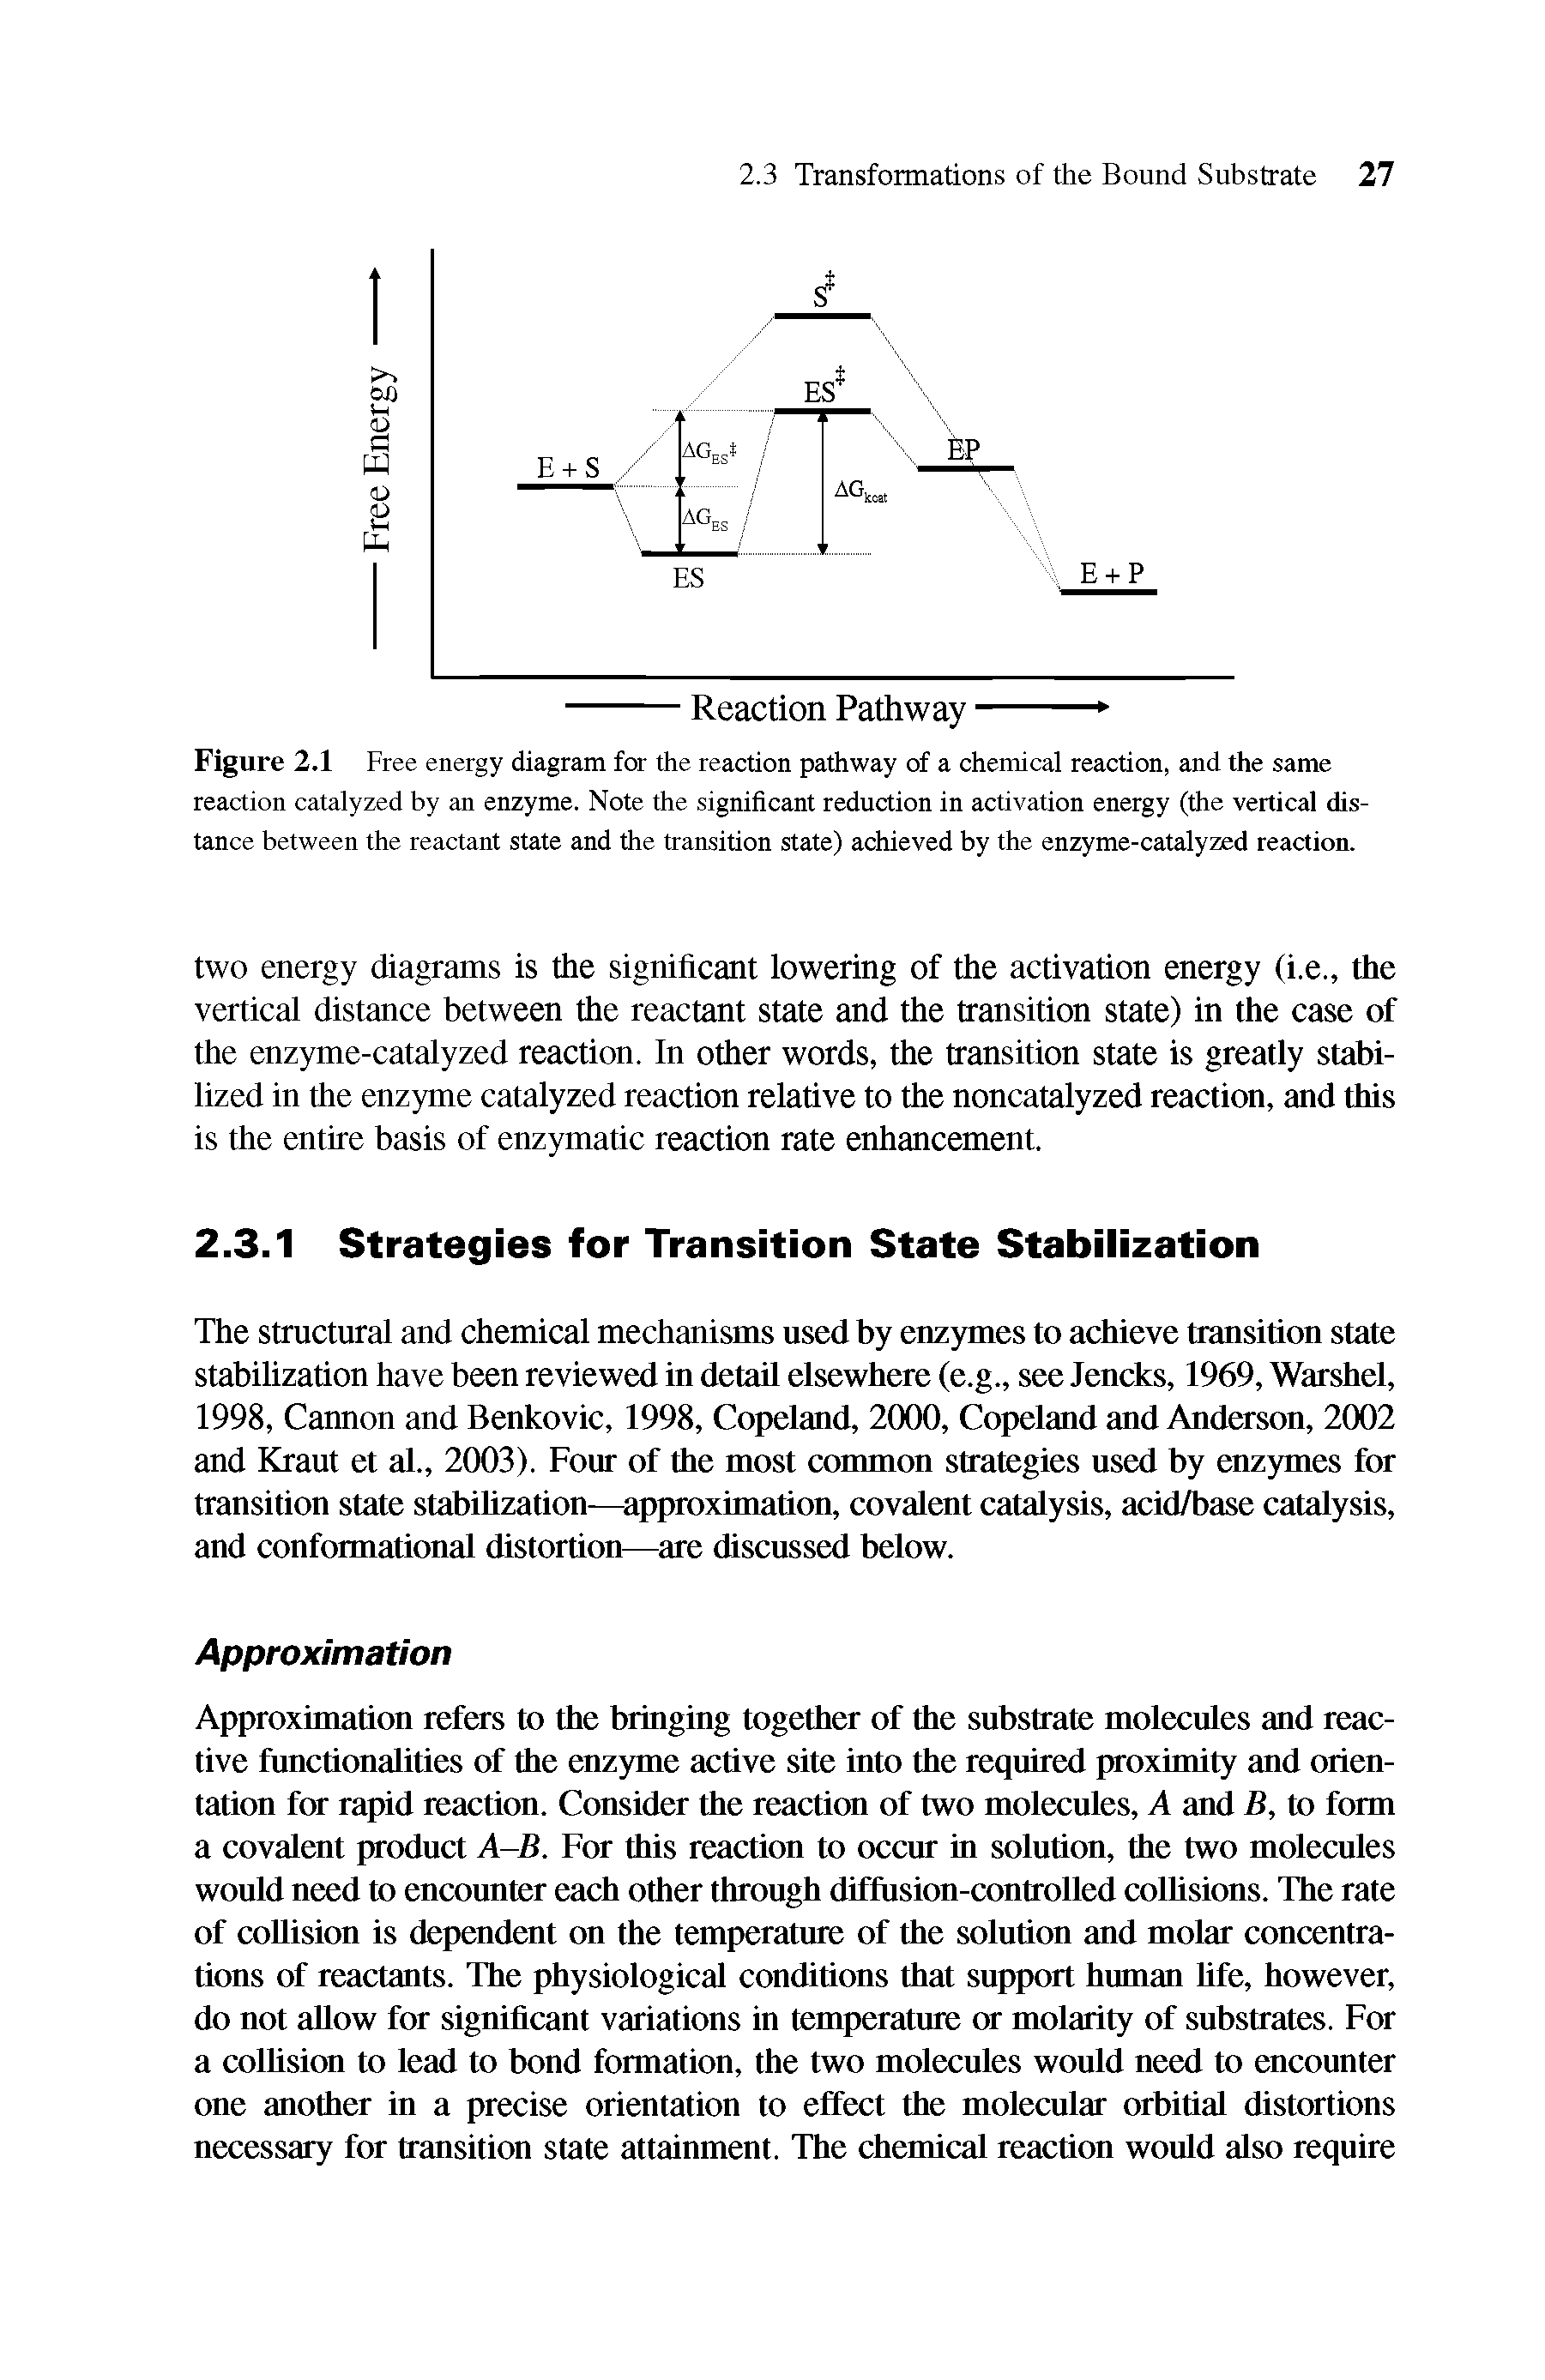 Figure 2.1 Free energy diagram for the reaction pathway of a chemical reaction, and the same reaction catalyzed by an enzyme. Note the significant reduction in activation energy (the vertical distance between the reactant state and the transition state) achieved by the enzyme-catalyzed reaction.